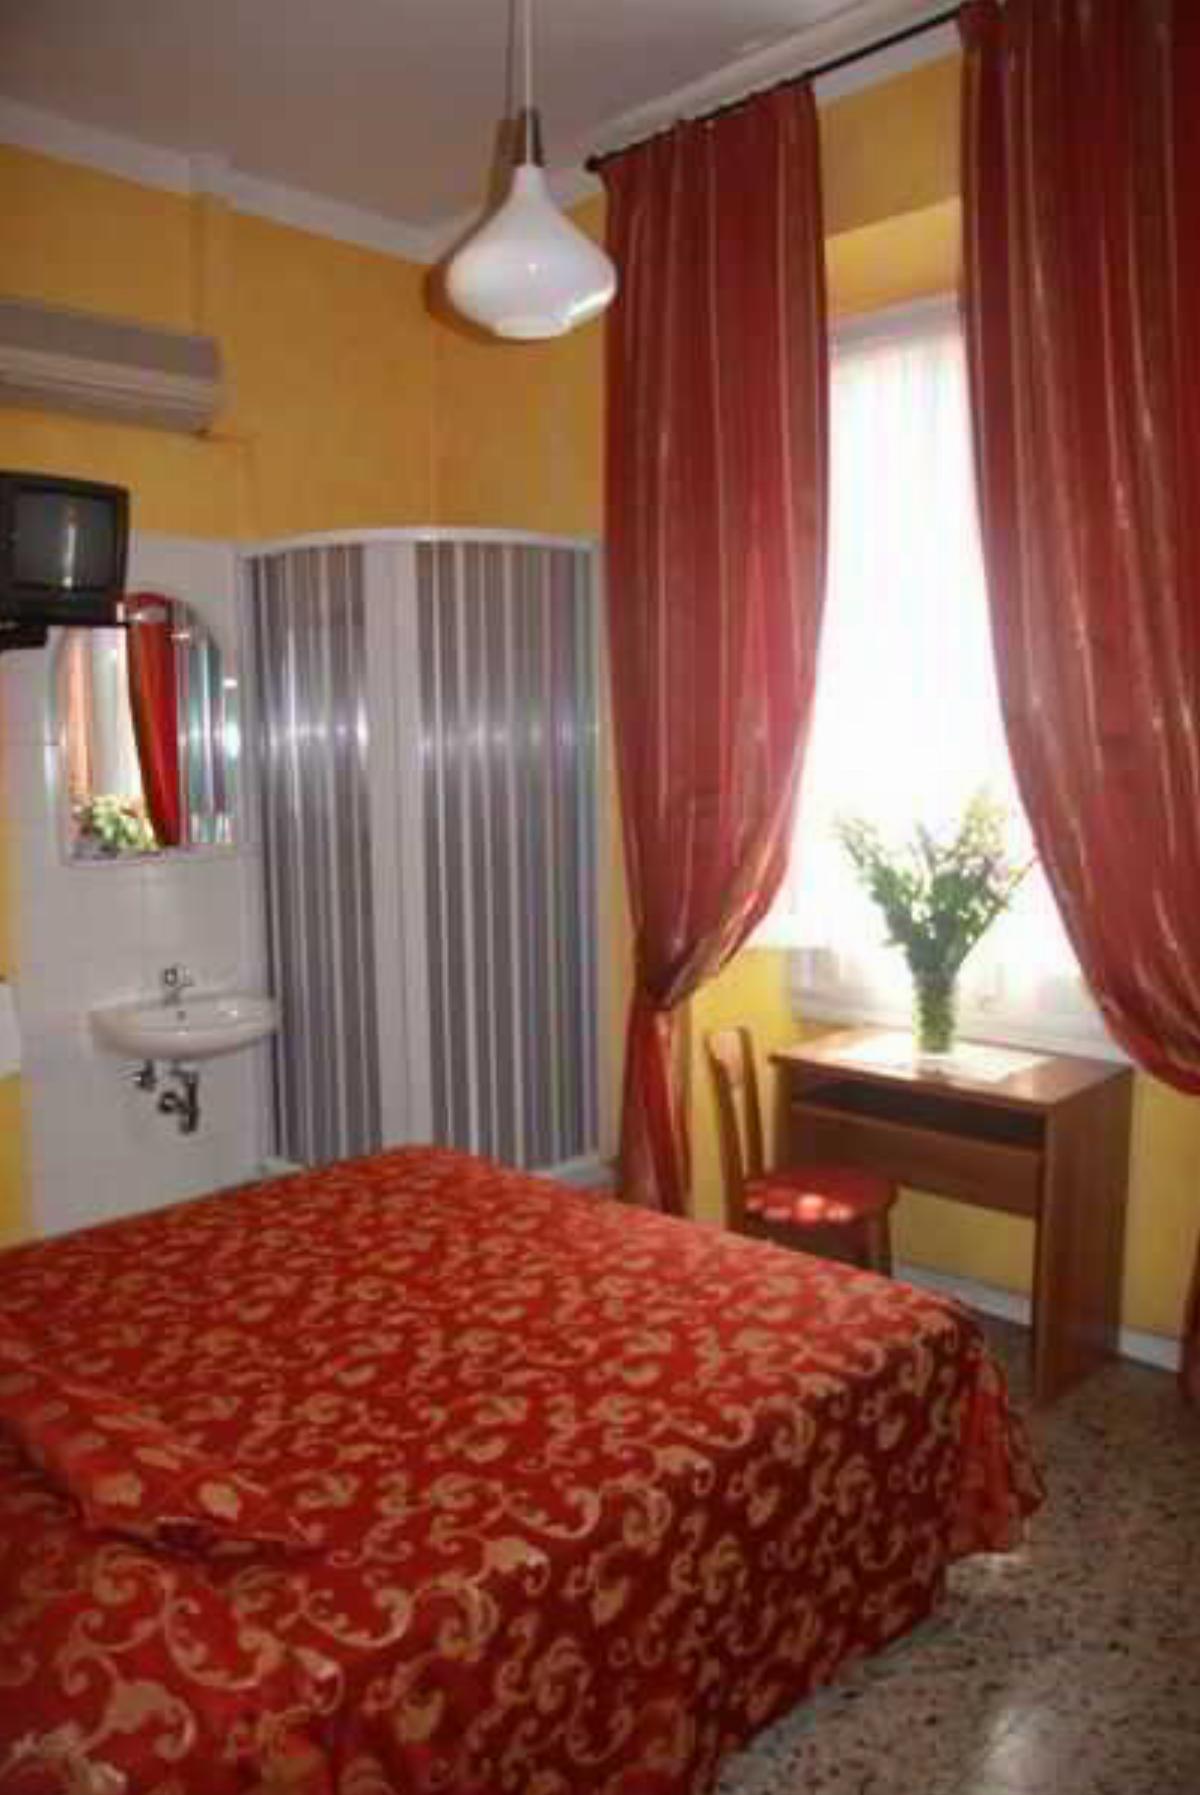 Hotel Giappone Hotel Florence Italy